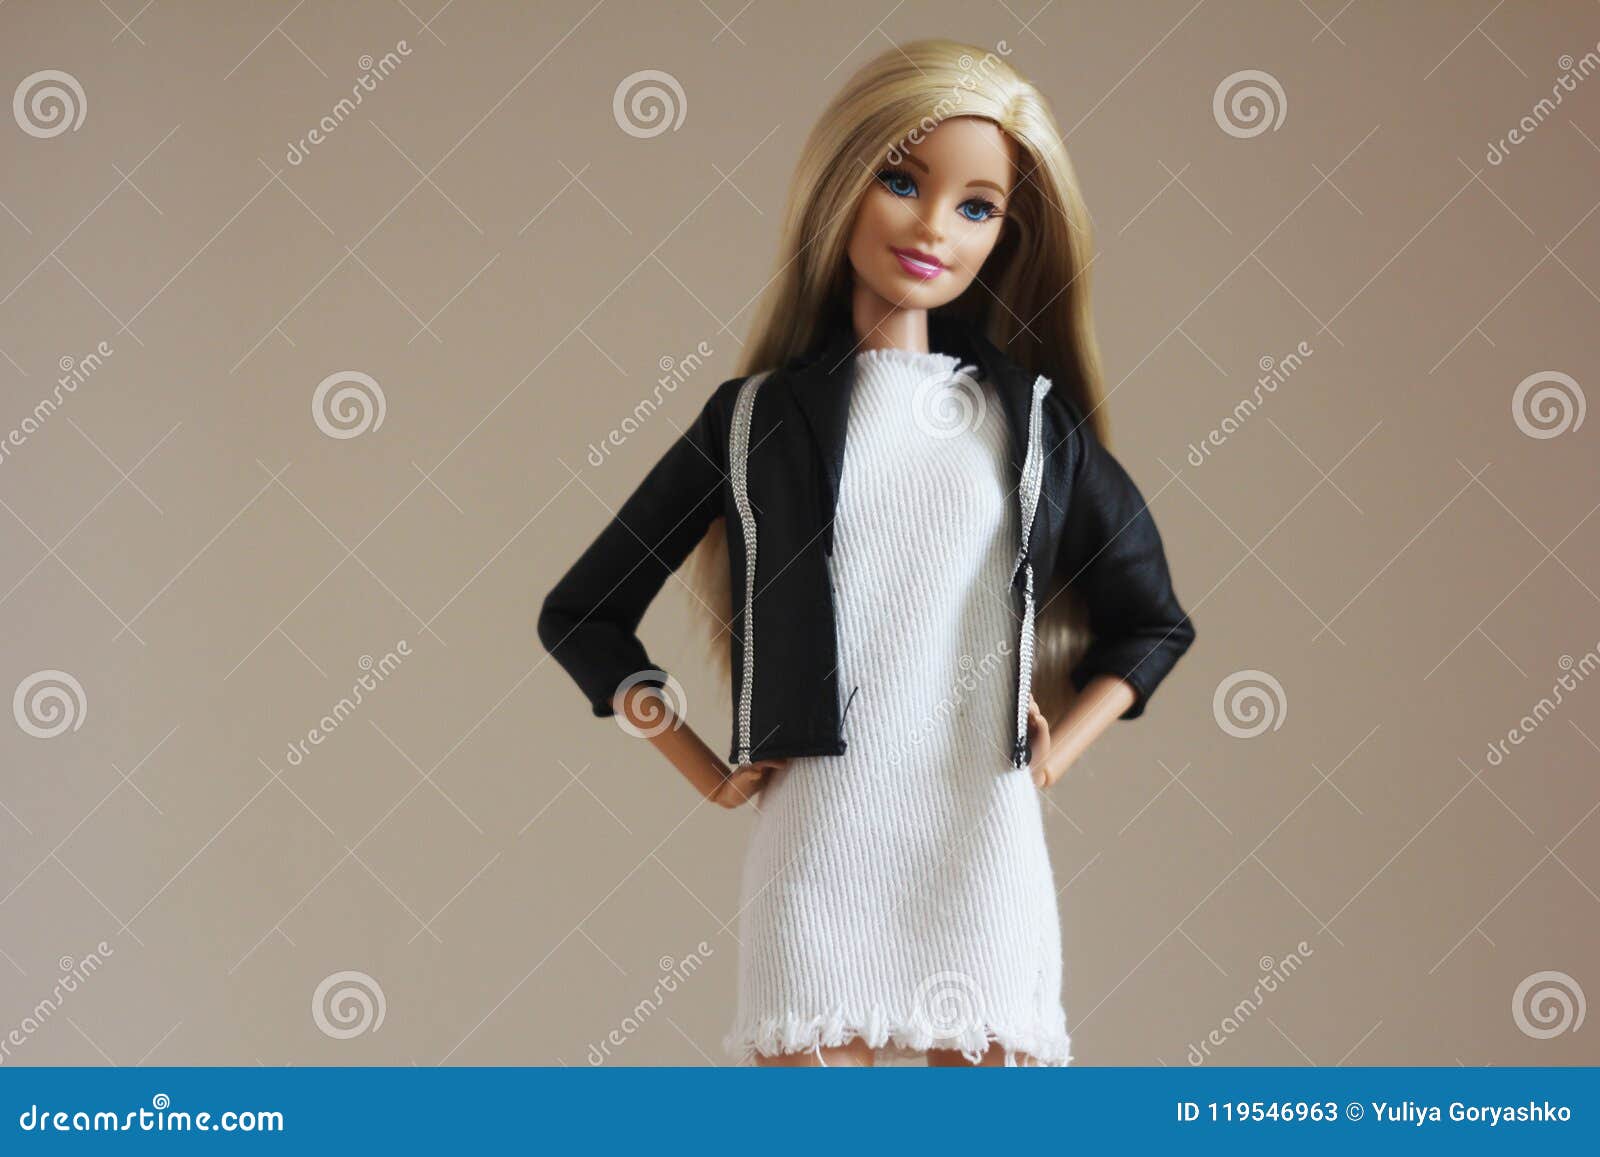 A Beautiful Barbie with White Hair. Stylish Doll Editorial Stock ...